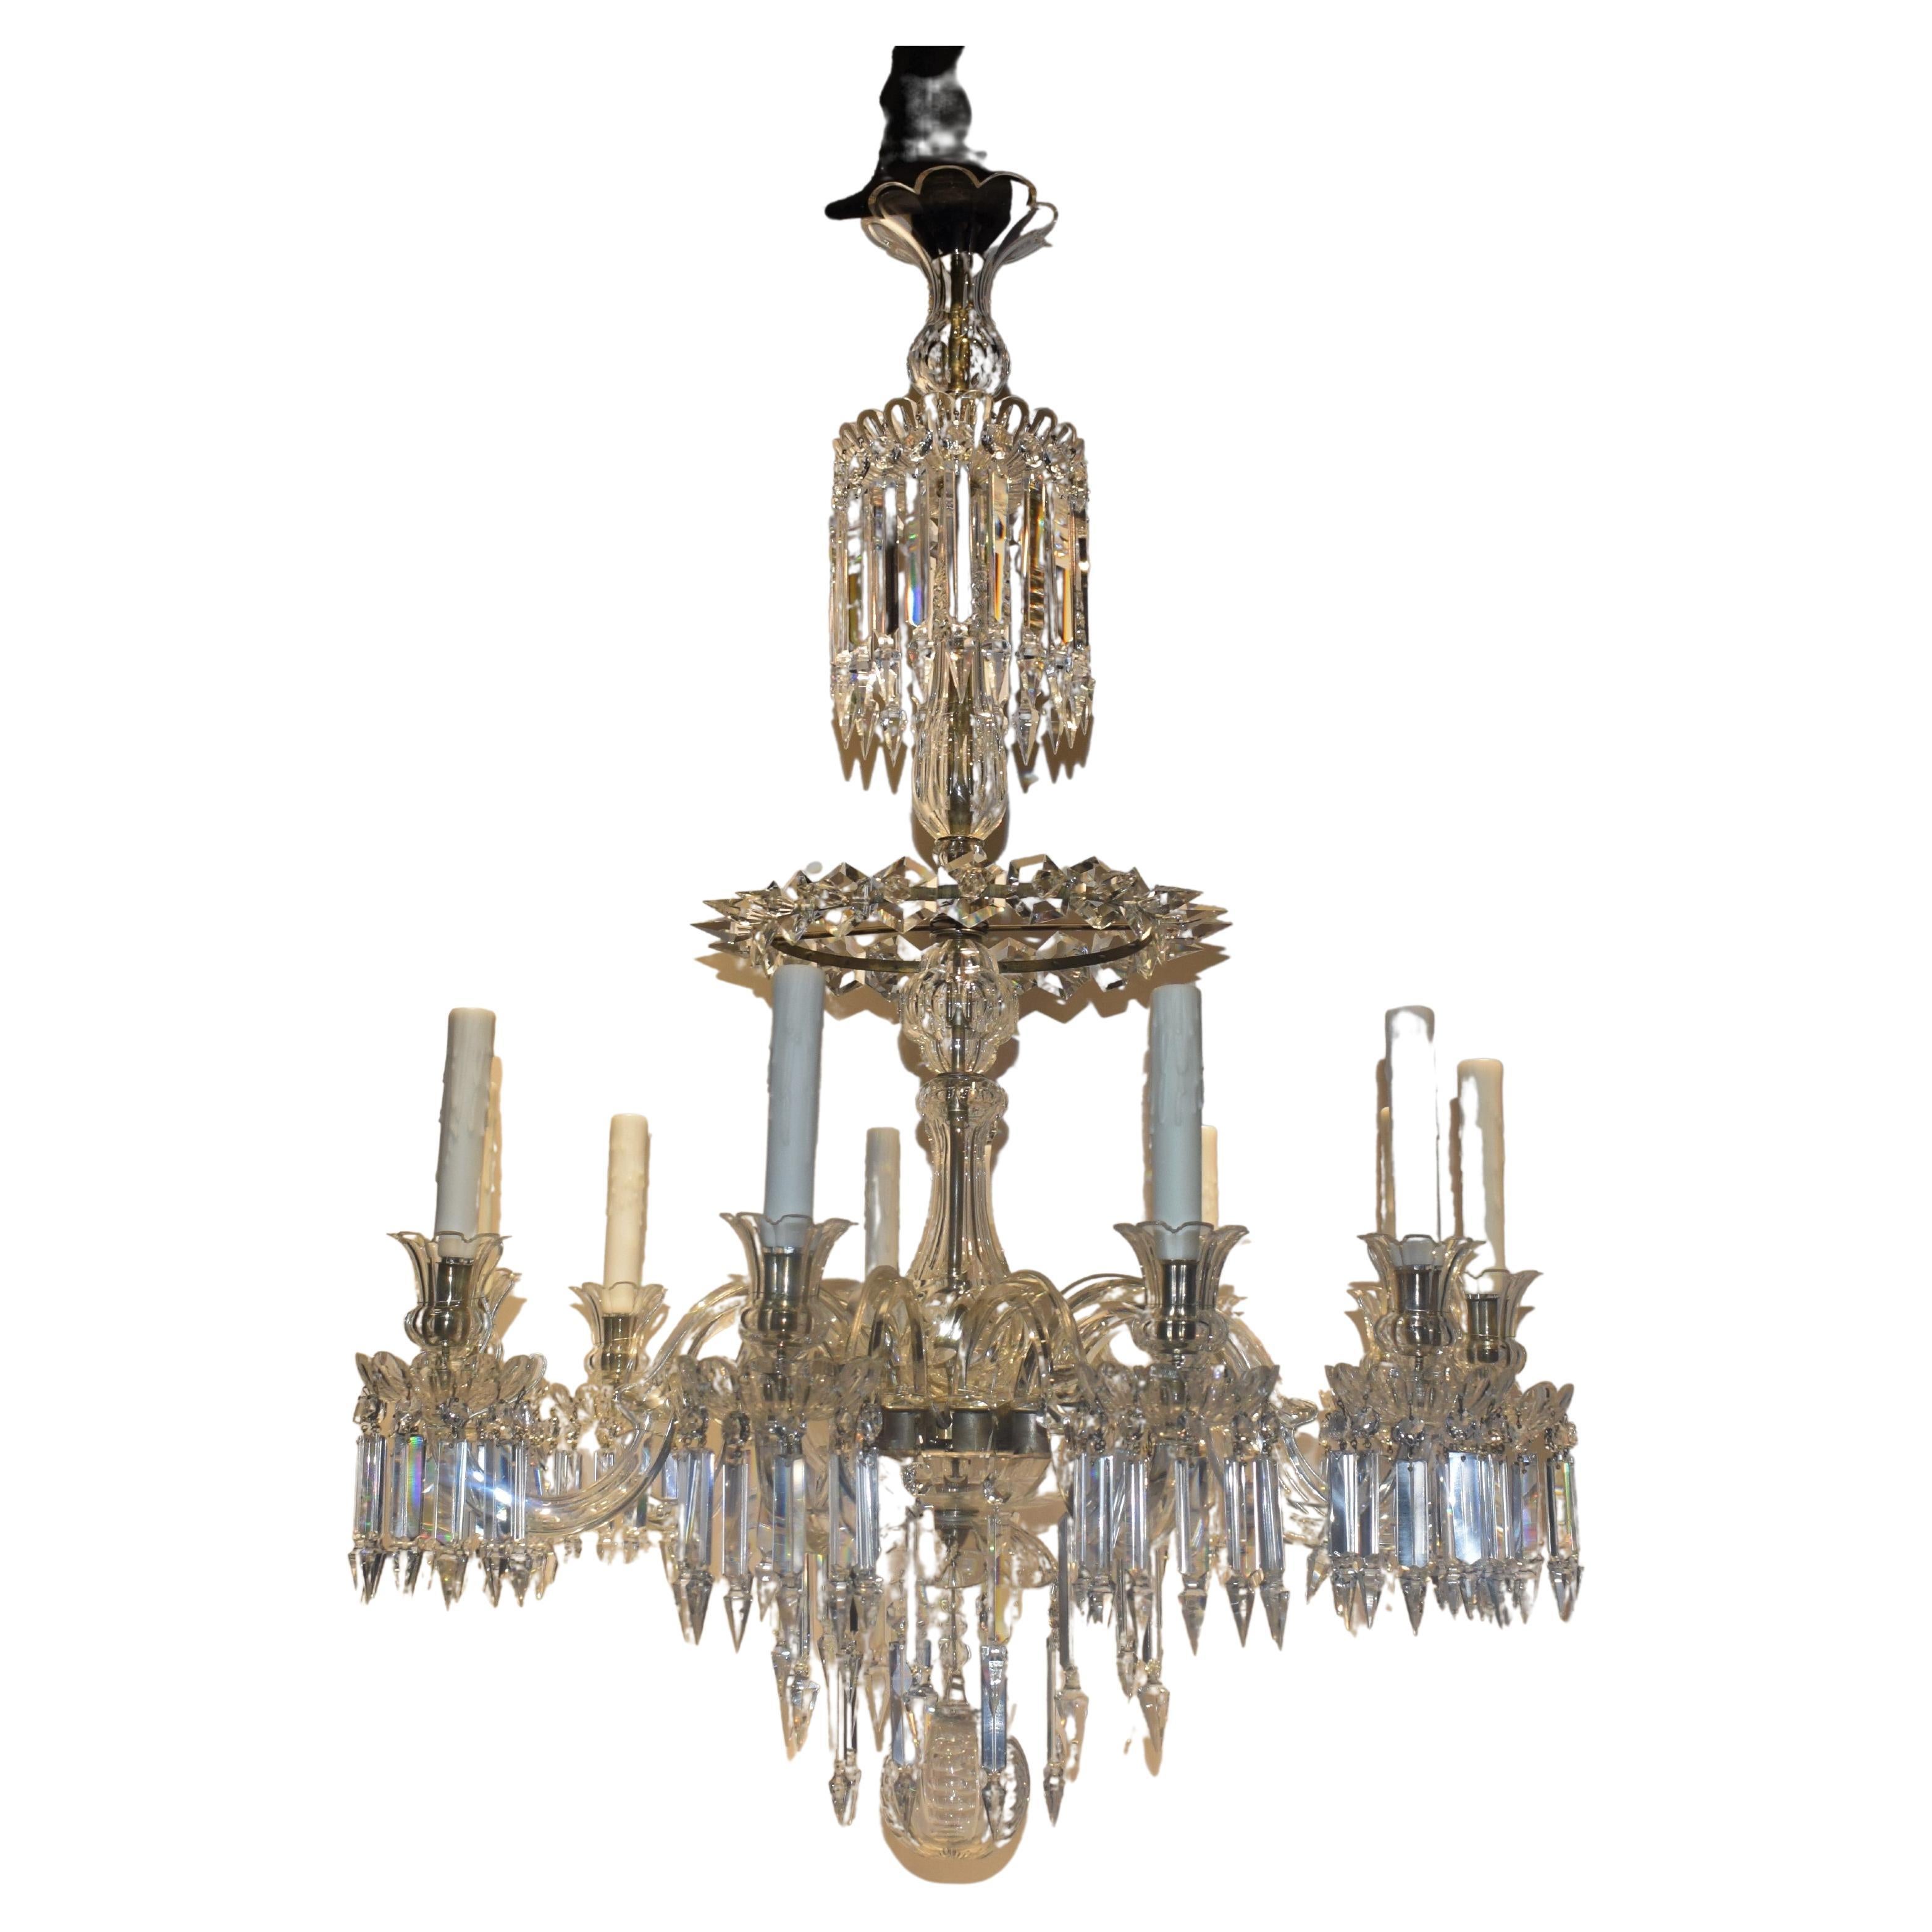 A Very Fine Crystal 10 Light Chandelier by Baccarat For Sale